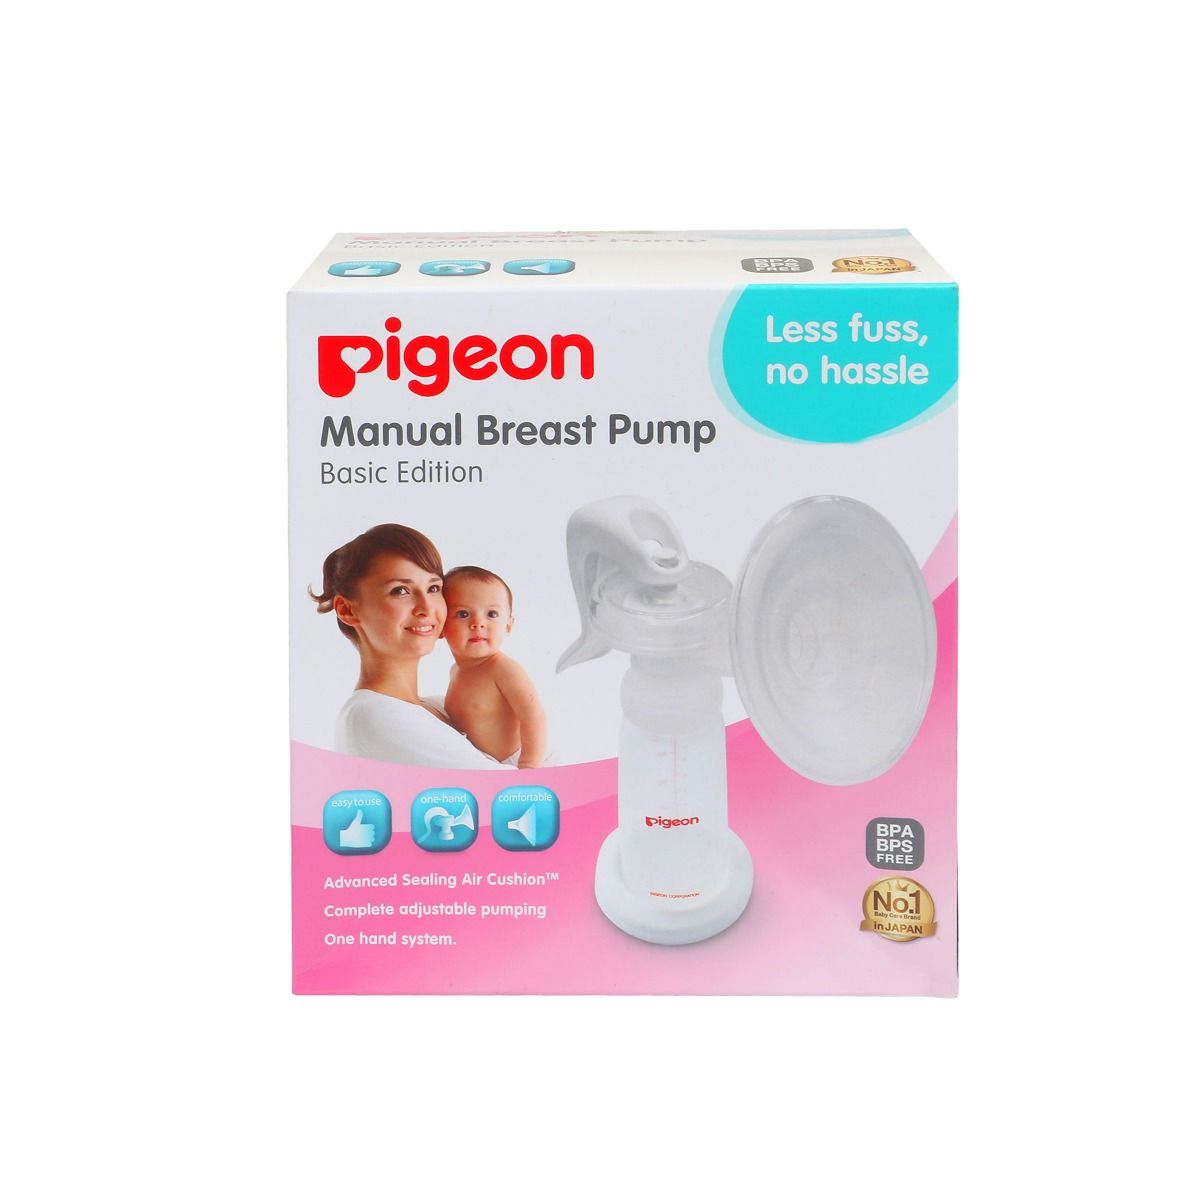 Pigeon Manual Breast Pump Basic Edition, 1 Count, Pack of 1 